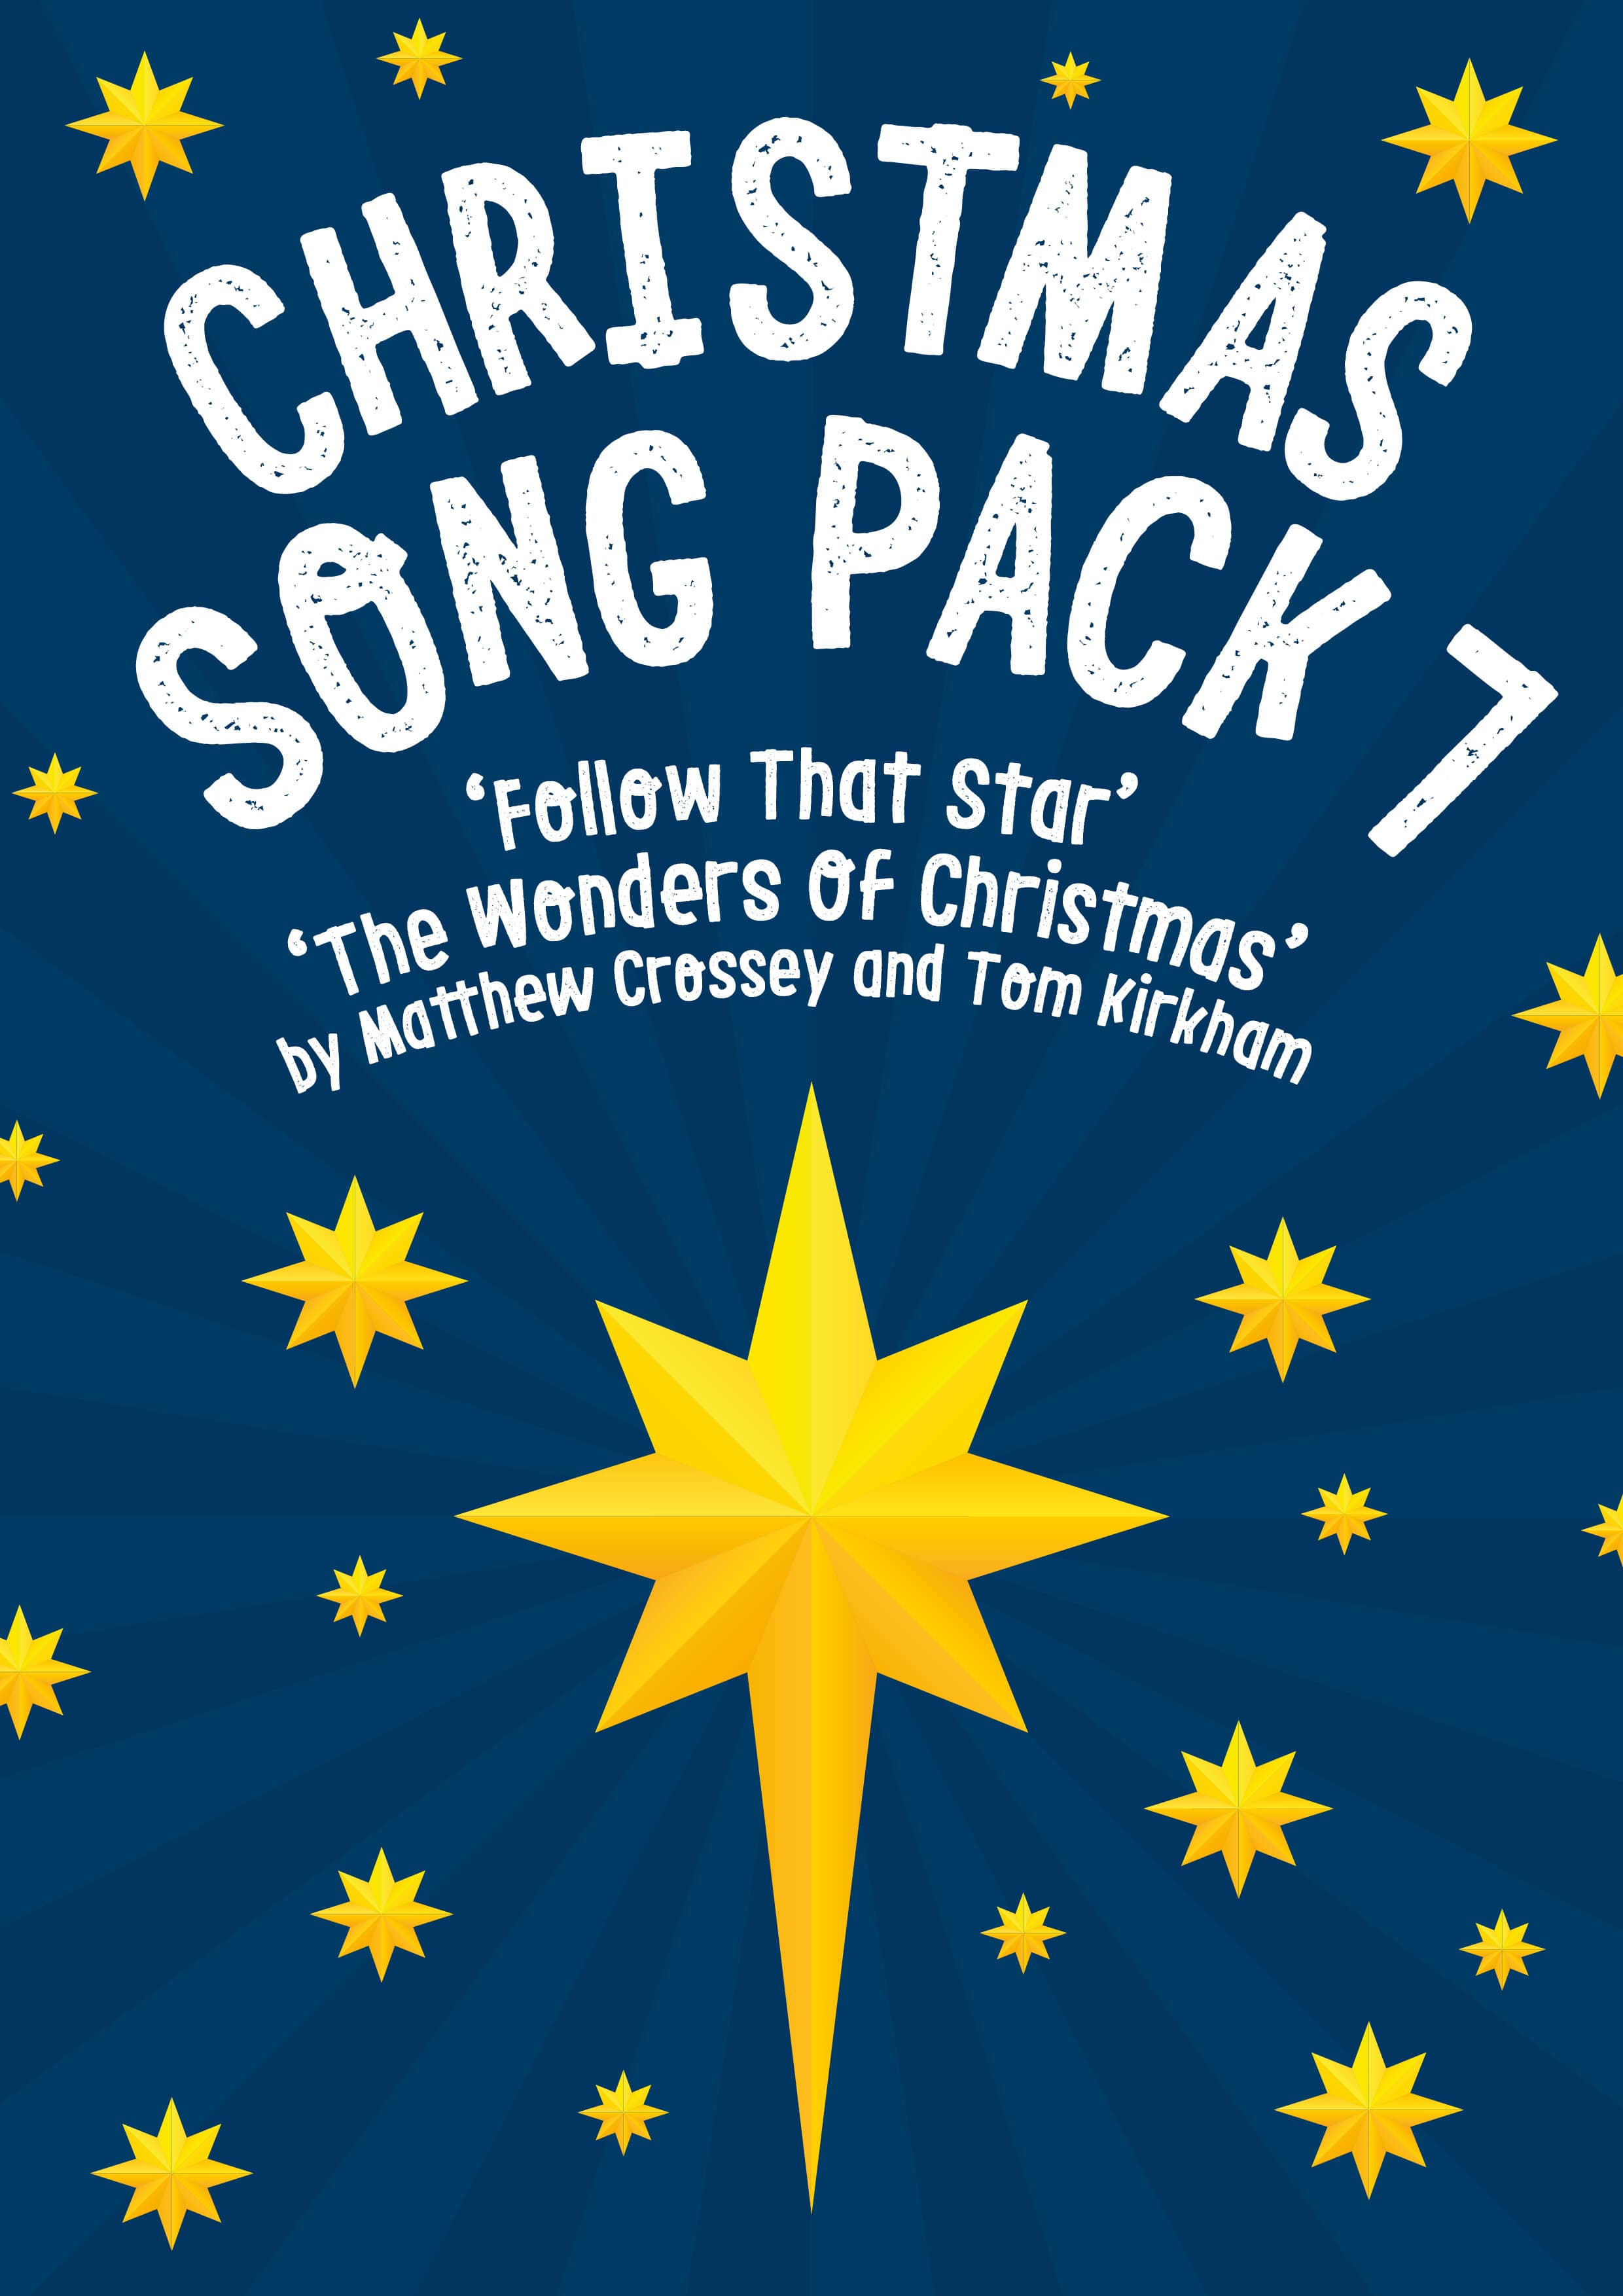 CHRISTMAS SONGS DOWNLOAD PACK 7 - 100% DISCOUNT WITH CODE CHRISTMAS7